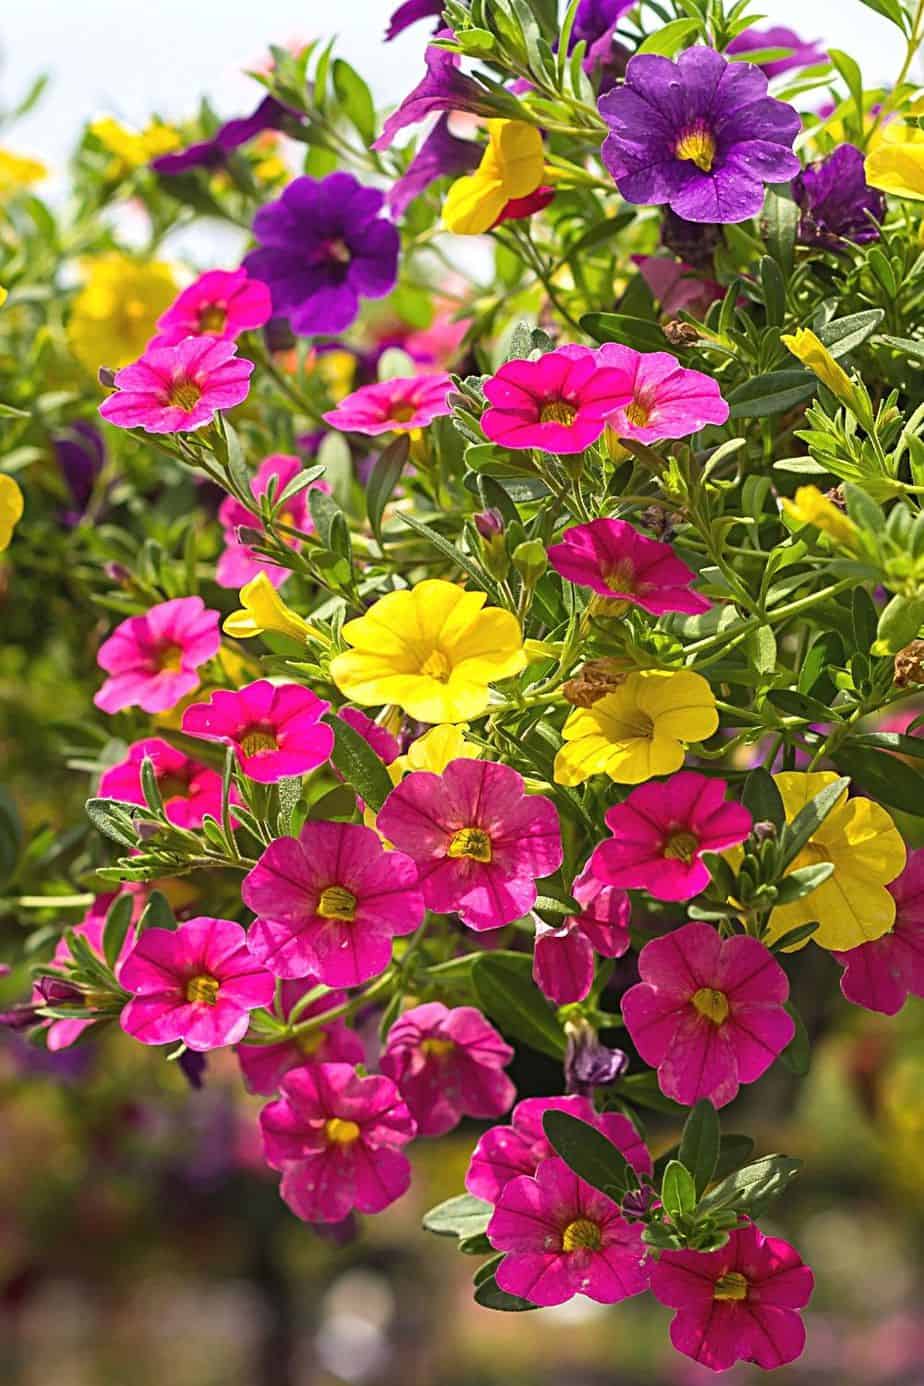 Million Bells, with its famous colorful flowers and foliage, are a great addition to your southeast-facing garden